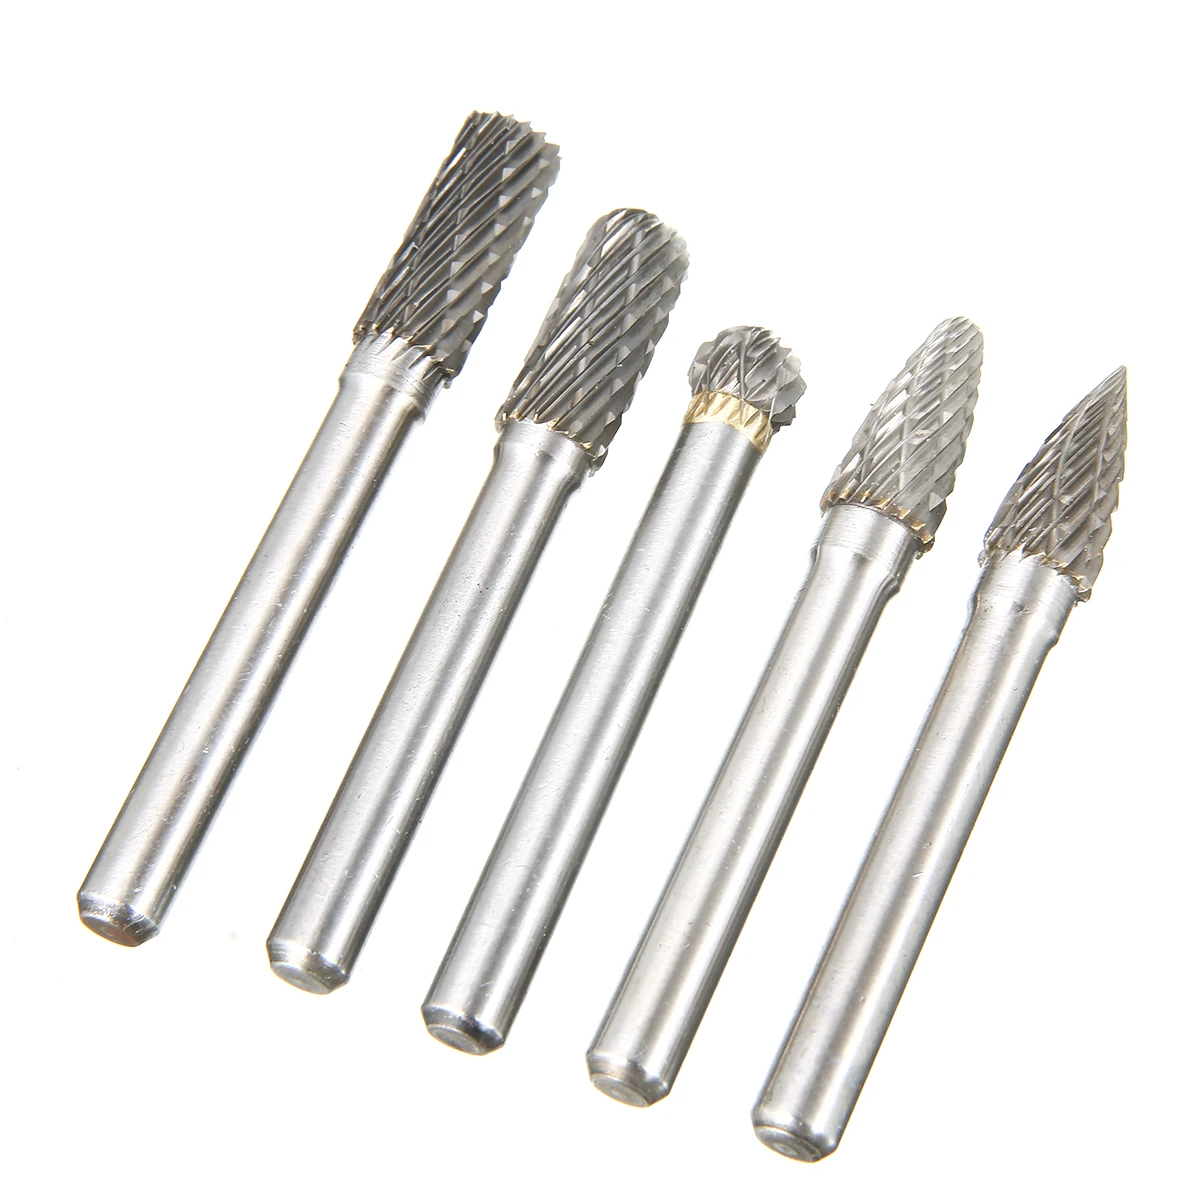 5pcs/set 8mm Rotary Cutter File Tungsten Carbide Rotary Point Burrs Die Grinder 6mm Shank Bit Set Engraving Durable Woodworking